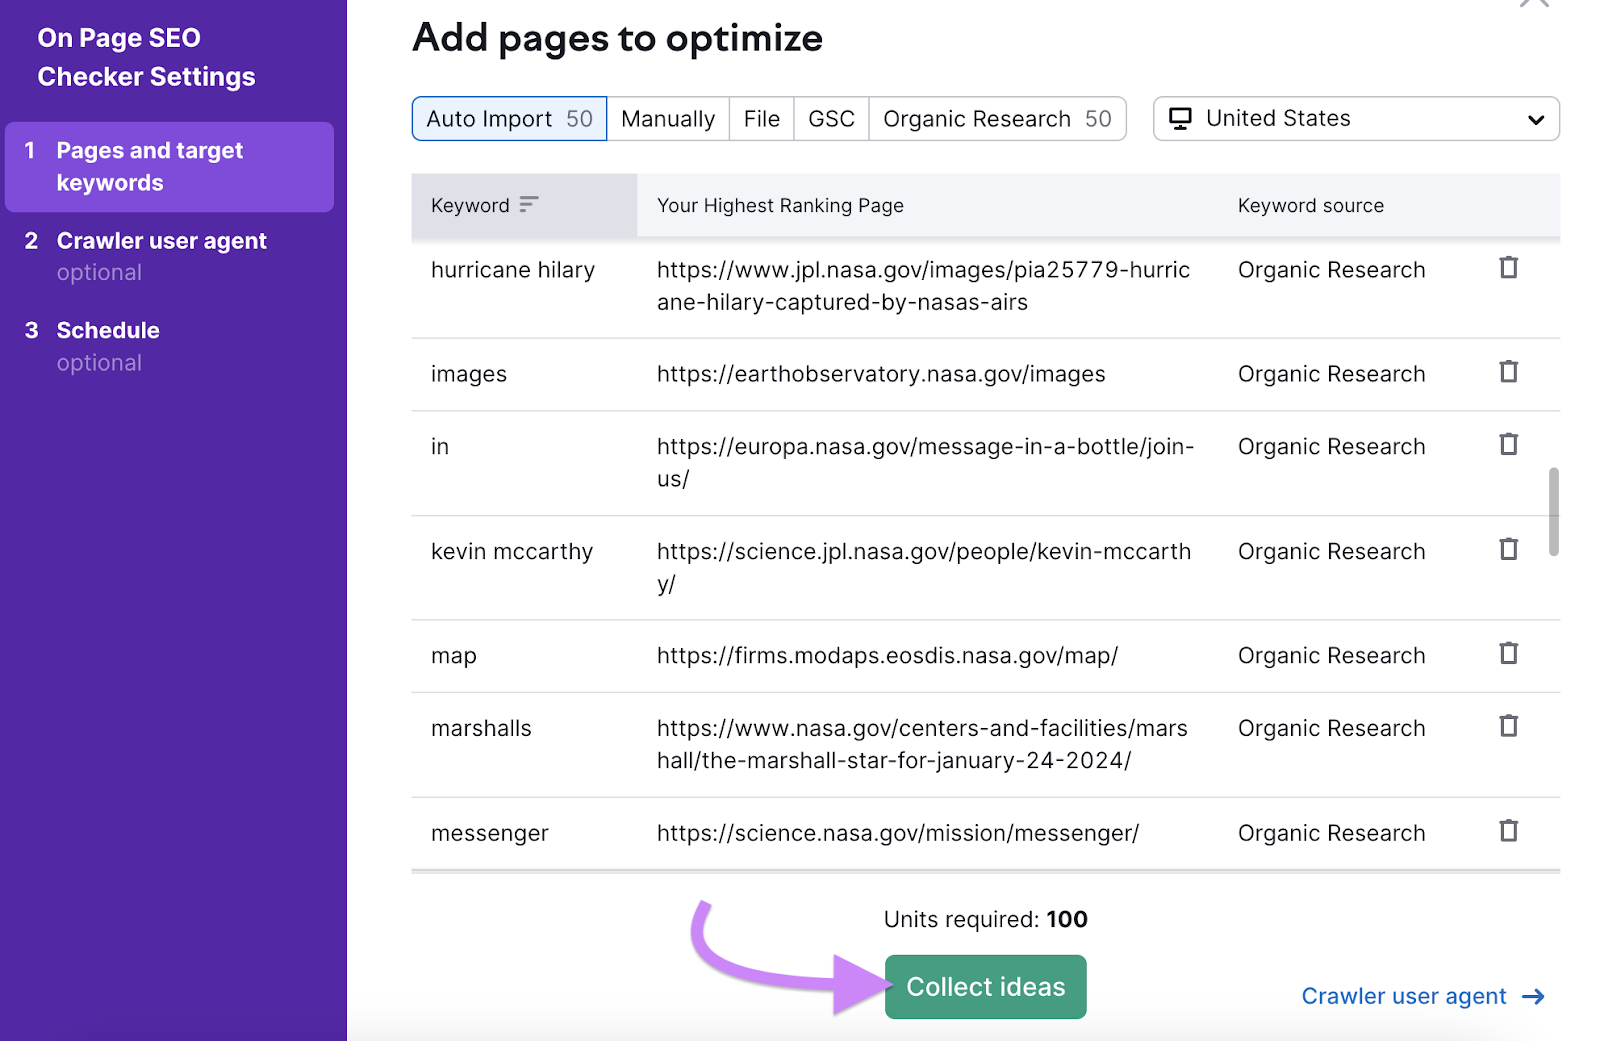 "Add pages to optimize" window in On Page SEO Checker settings